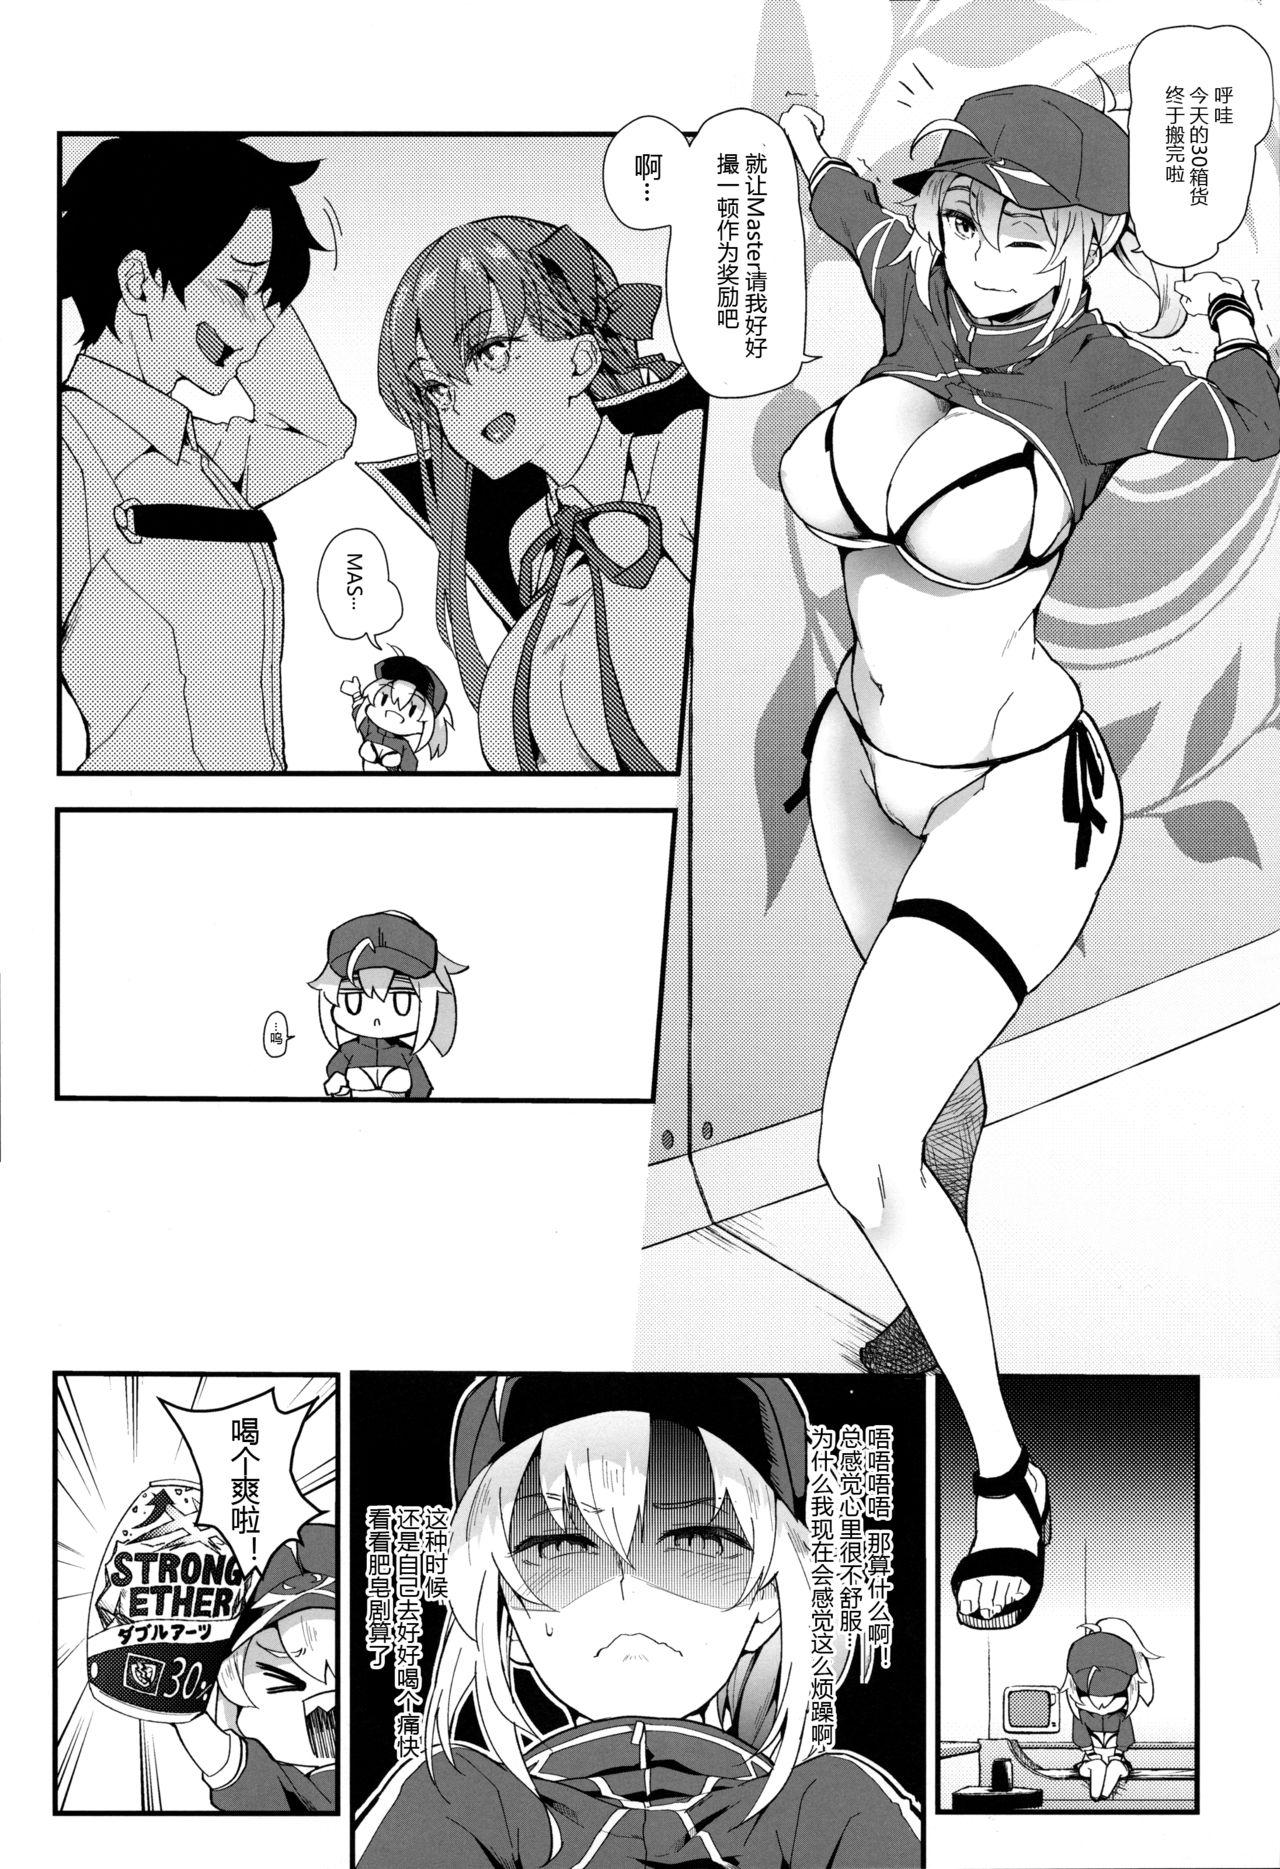 Puto Foreign! Foreign? XX!? - Fate grand order Couples - Page 3